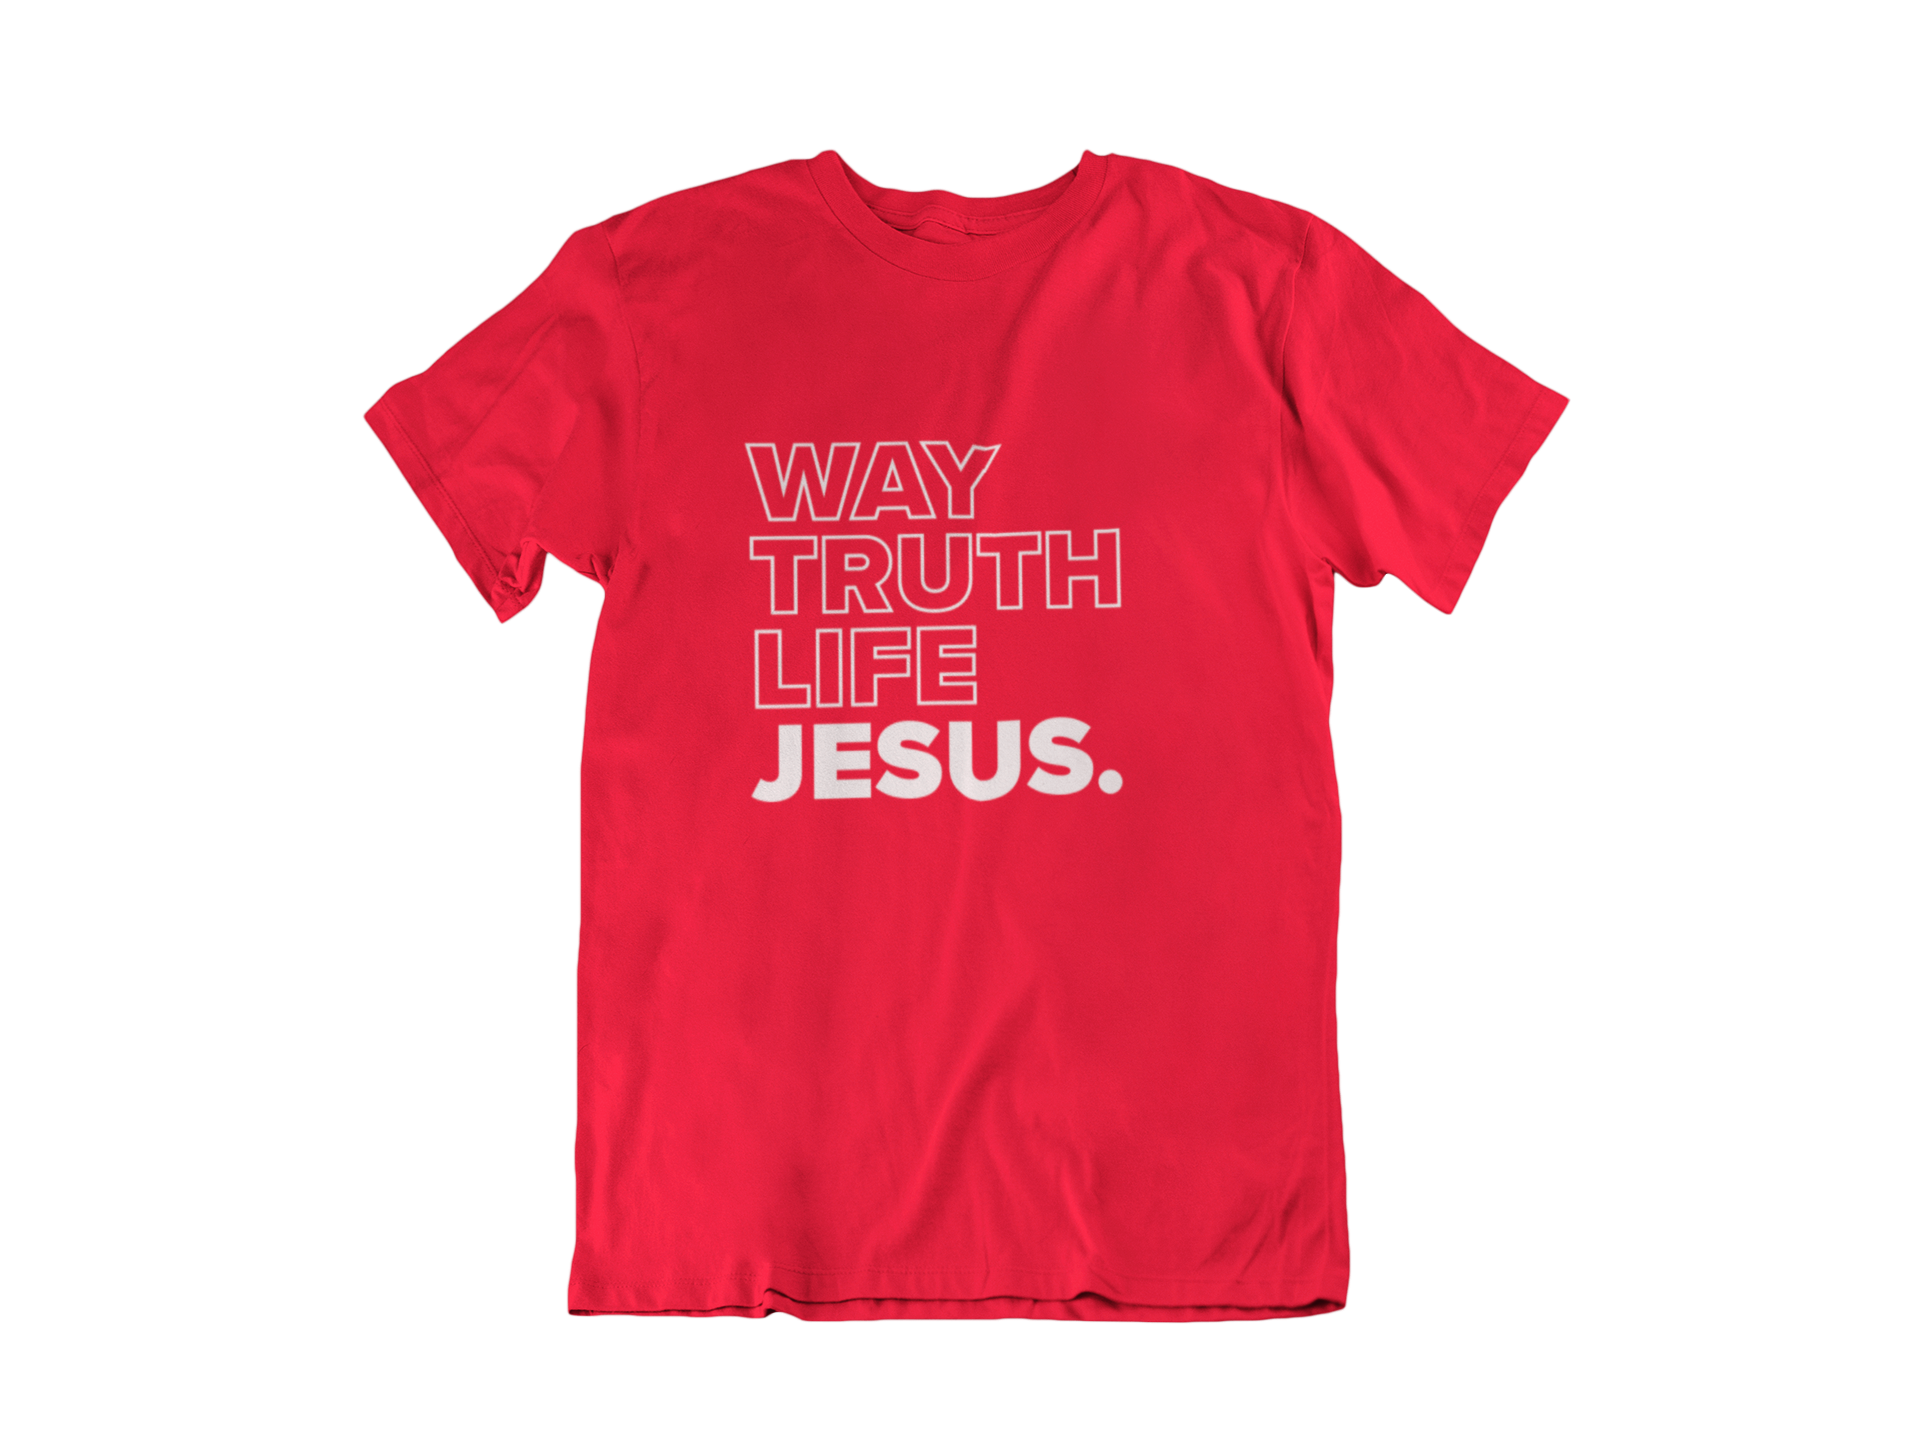 JESUS WAY TRUTH LIFE RED - CHRISTIAN T-SHIRT